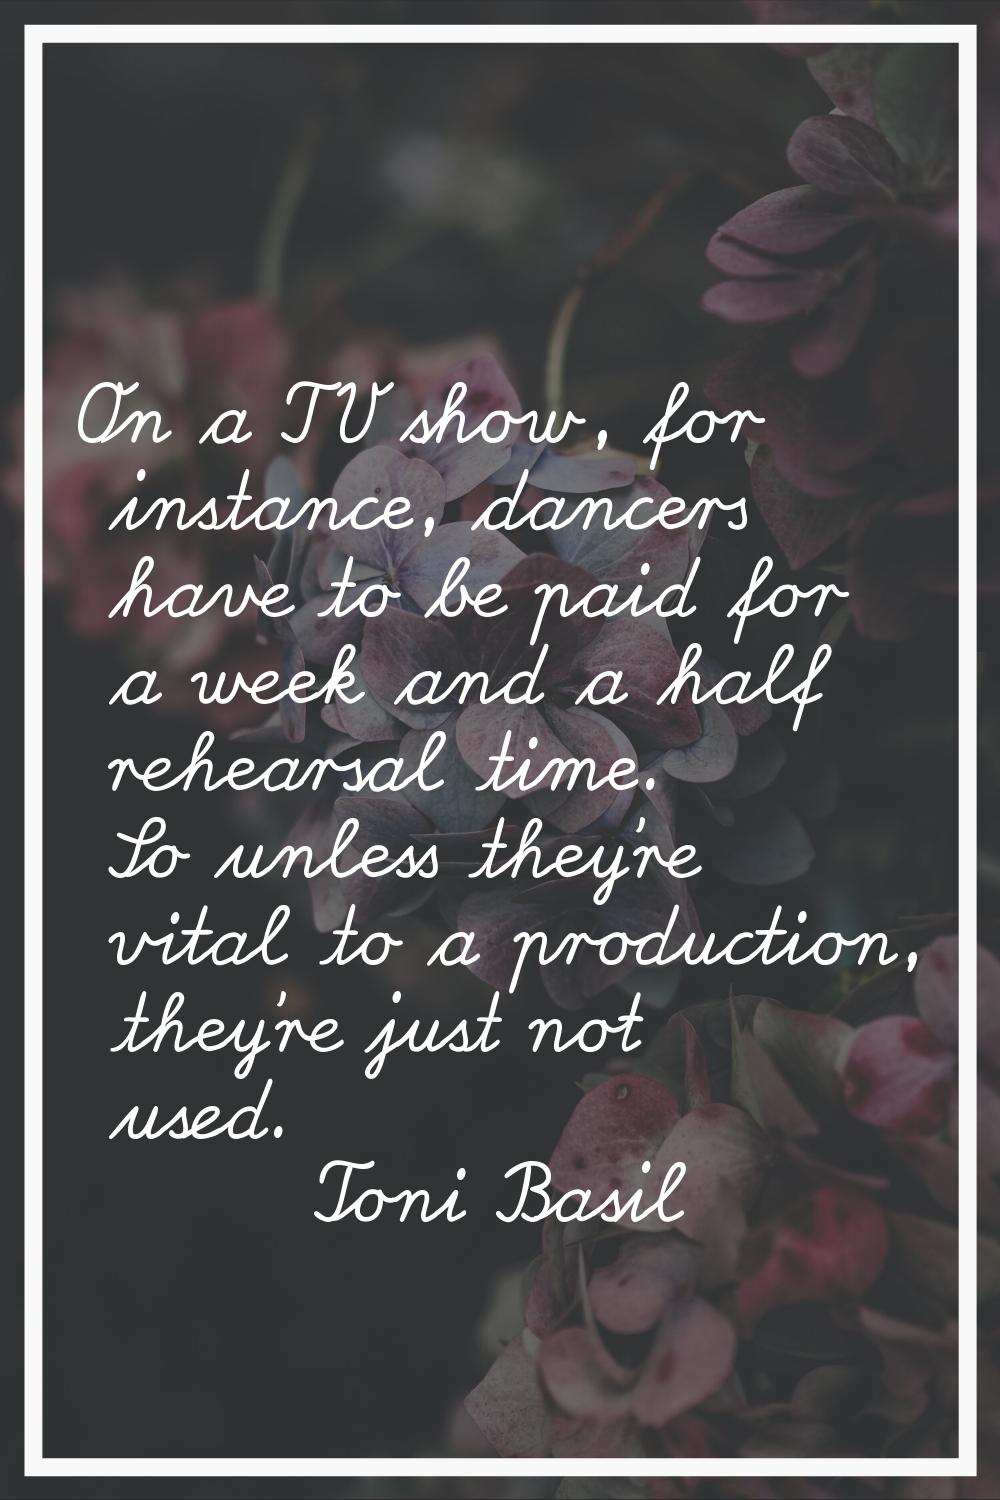 On a TV show, for instance, dancers have to be paid for a week and a half rehearsal time. So unless